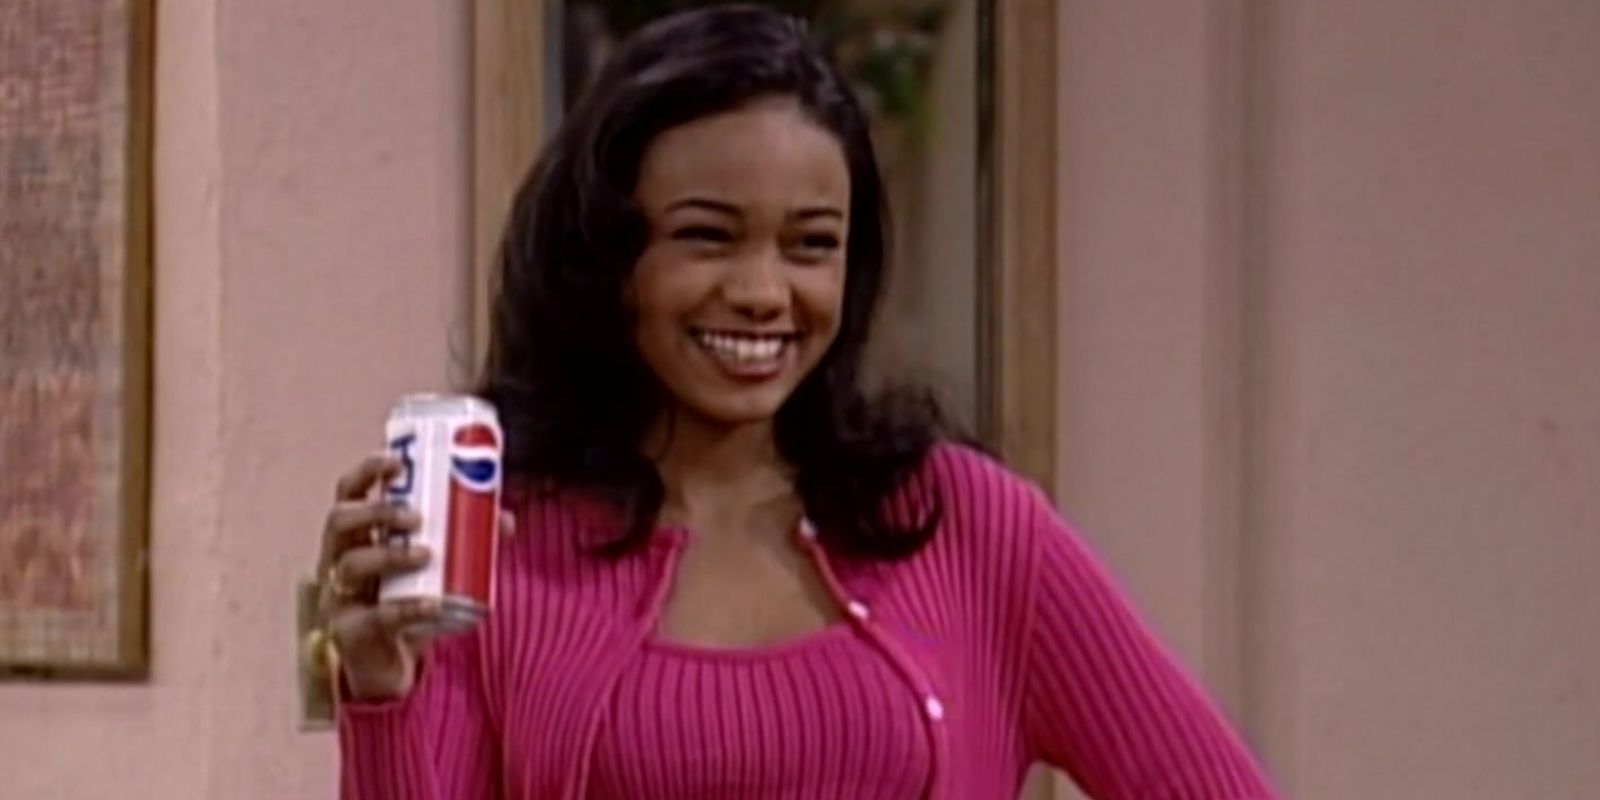 Ashley Banks poses with a soda can in the Banks living room in The Fresh Prince of Bel Air